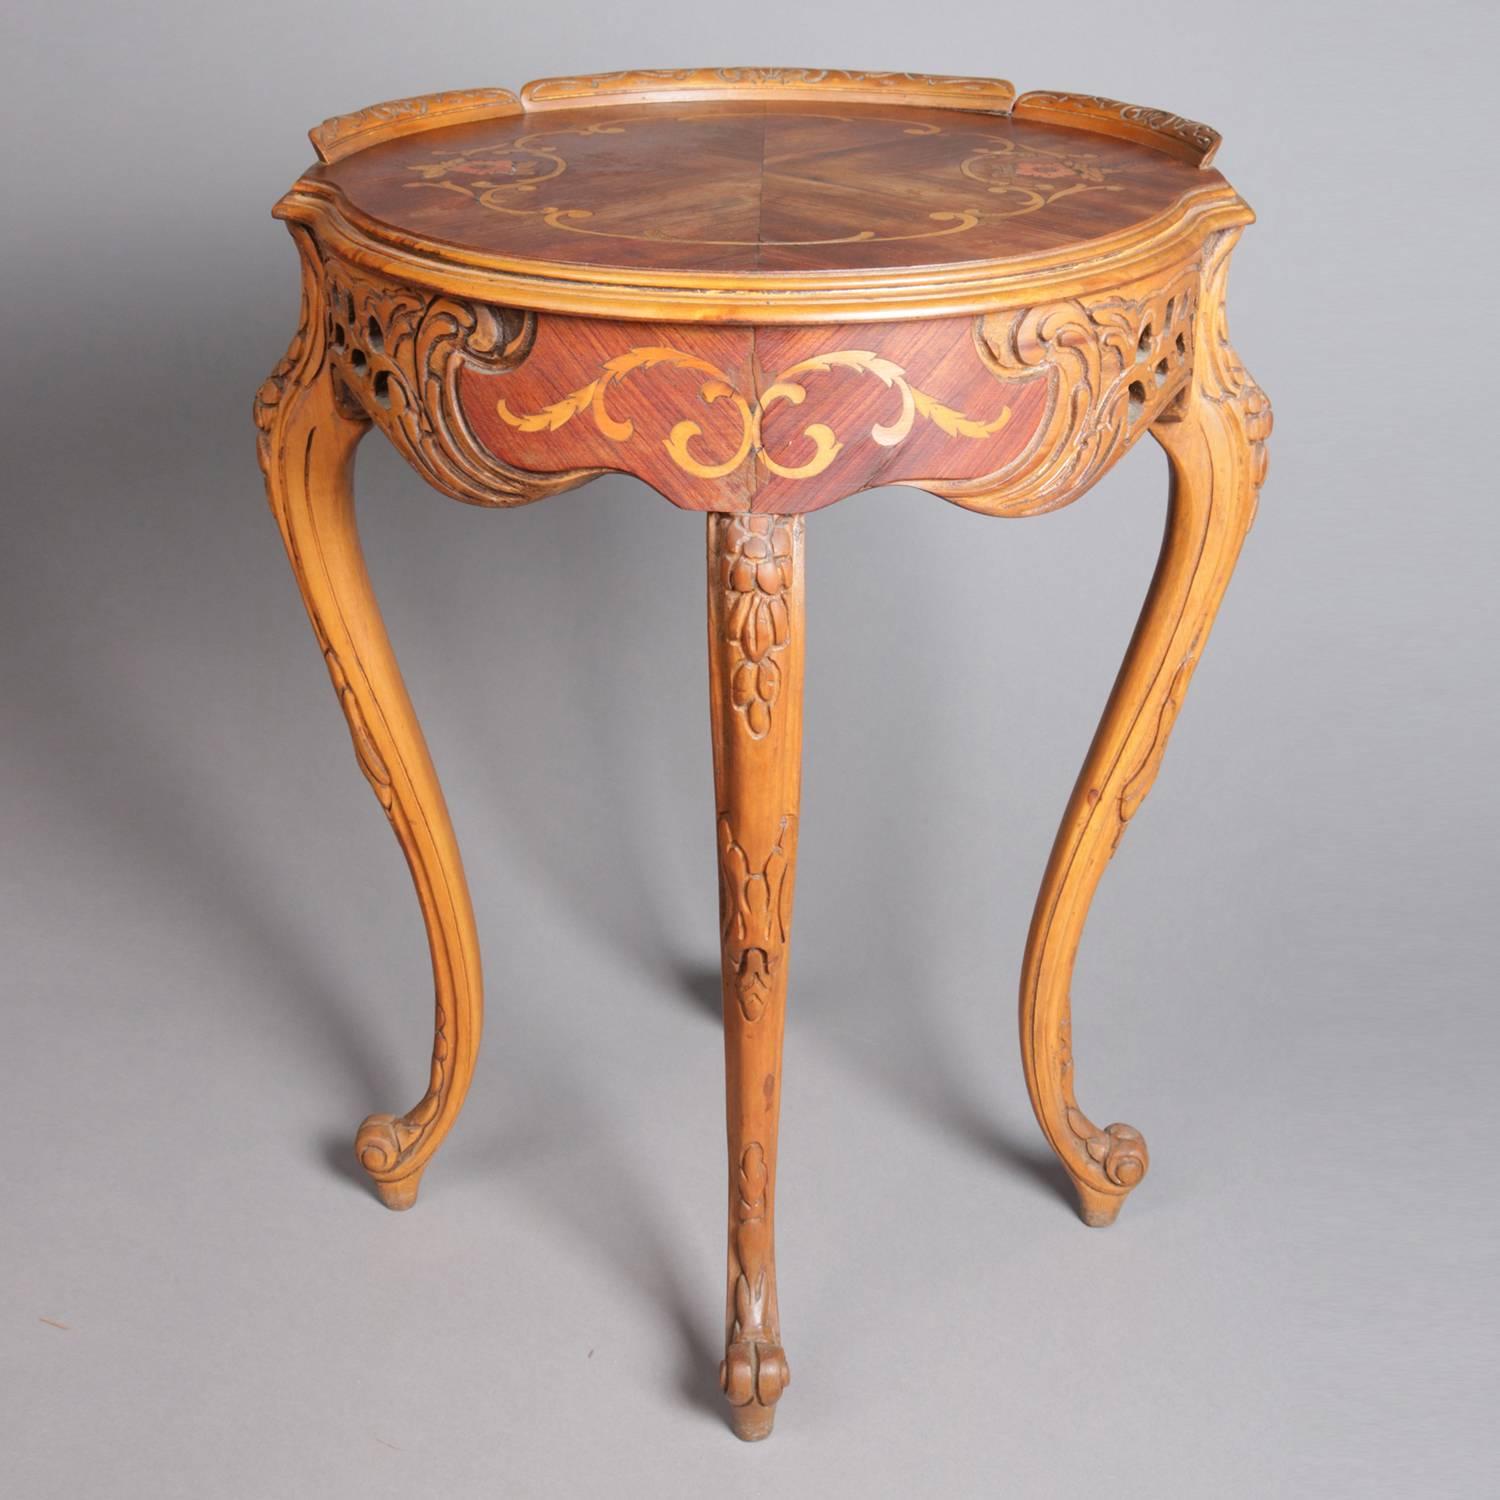 French carved yew wood occasional tea table features bookmatched mahogany top with floral and scroll marquetry and carved backsplash, foliate carved and pierced apron with satinwood scroll rinceaux inlaid mahogany reserve, and seated on carved